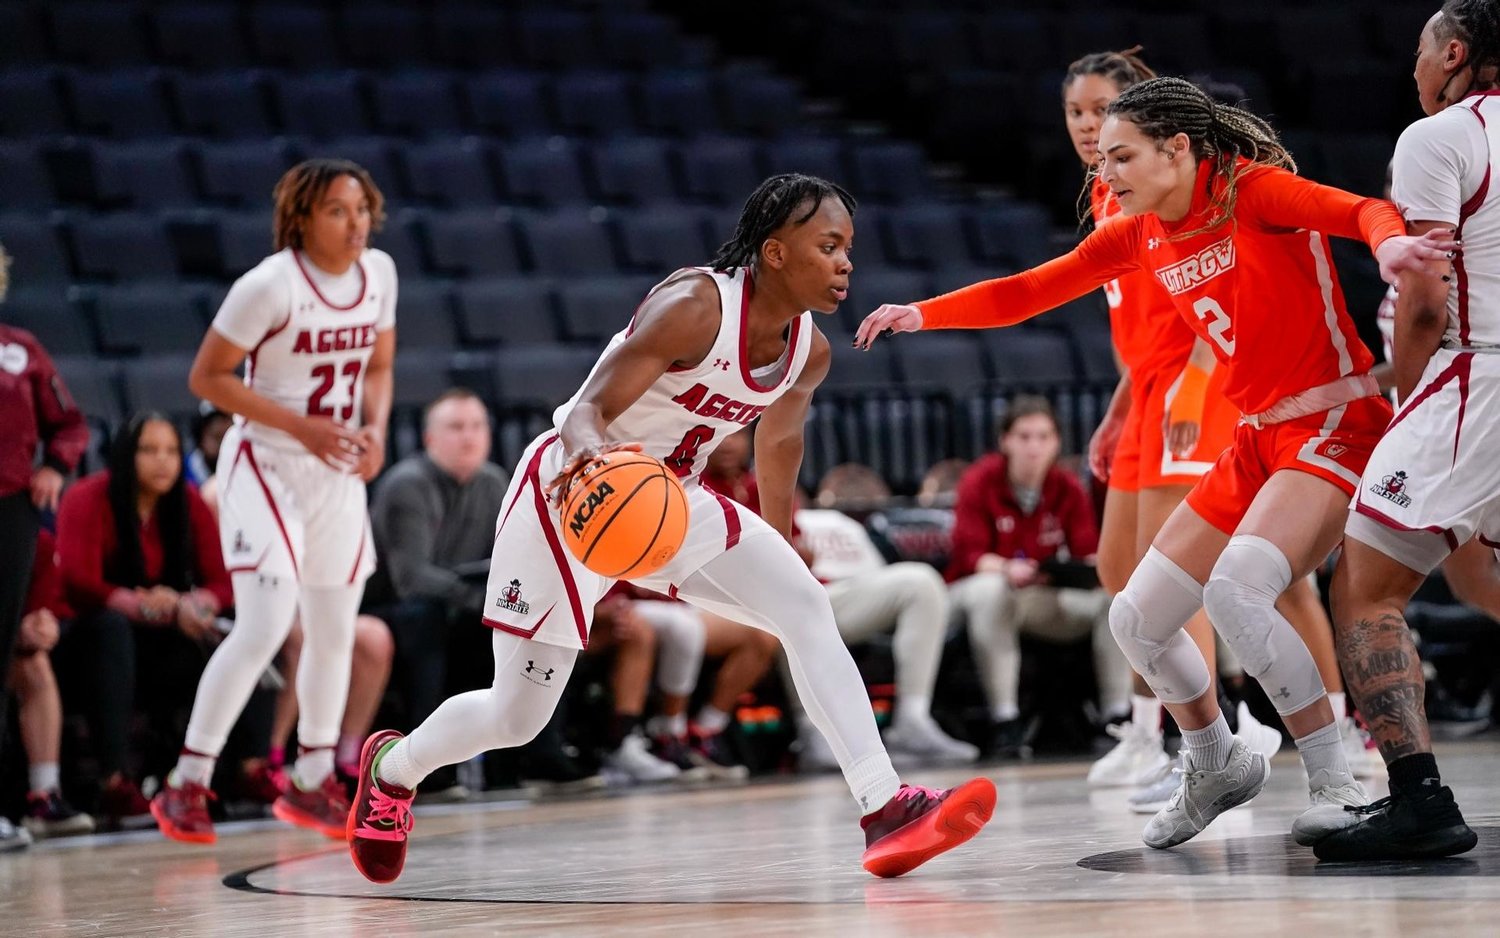 Junior guard Molly Kaiser paced the Aggies with 25 points in their 65-49 defeat of UTRGV in the first round of the WAC tournament.